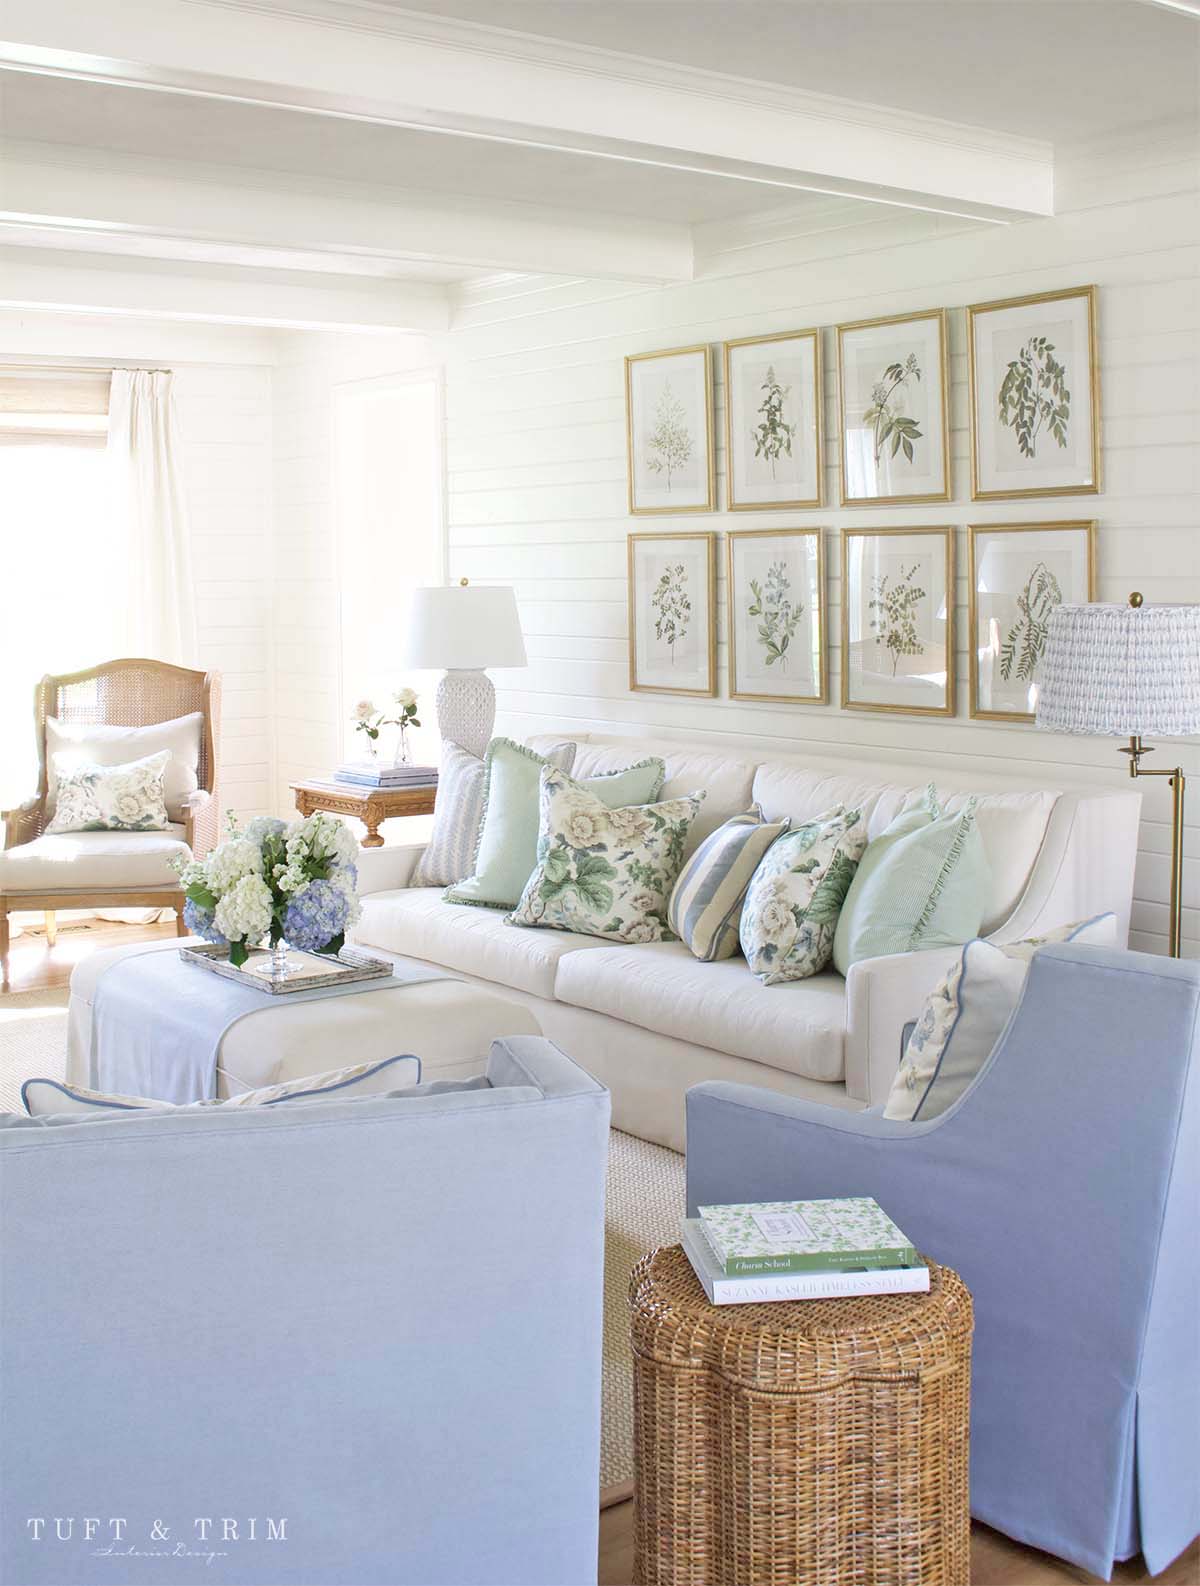 A Cape Cod Style Home Makeover: Before & After with Tuft & Trim Interior Design